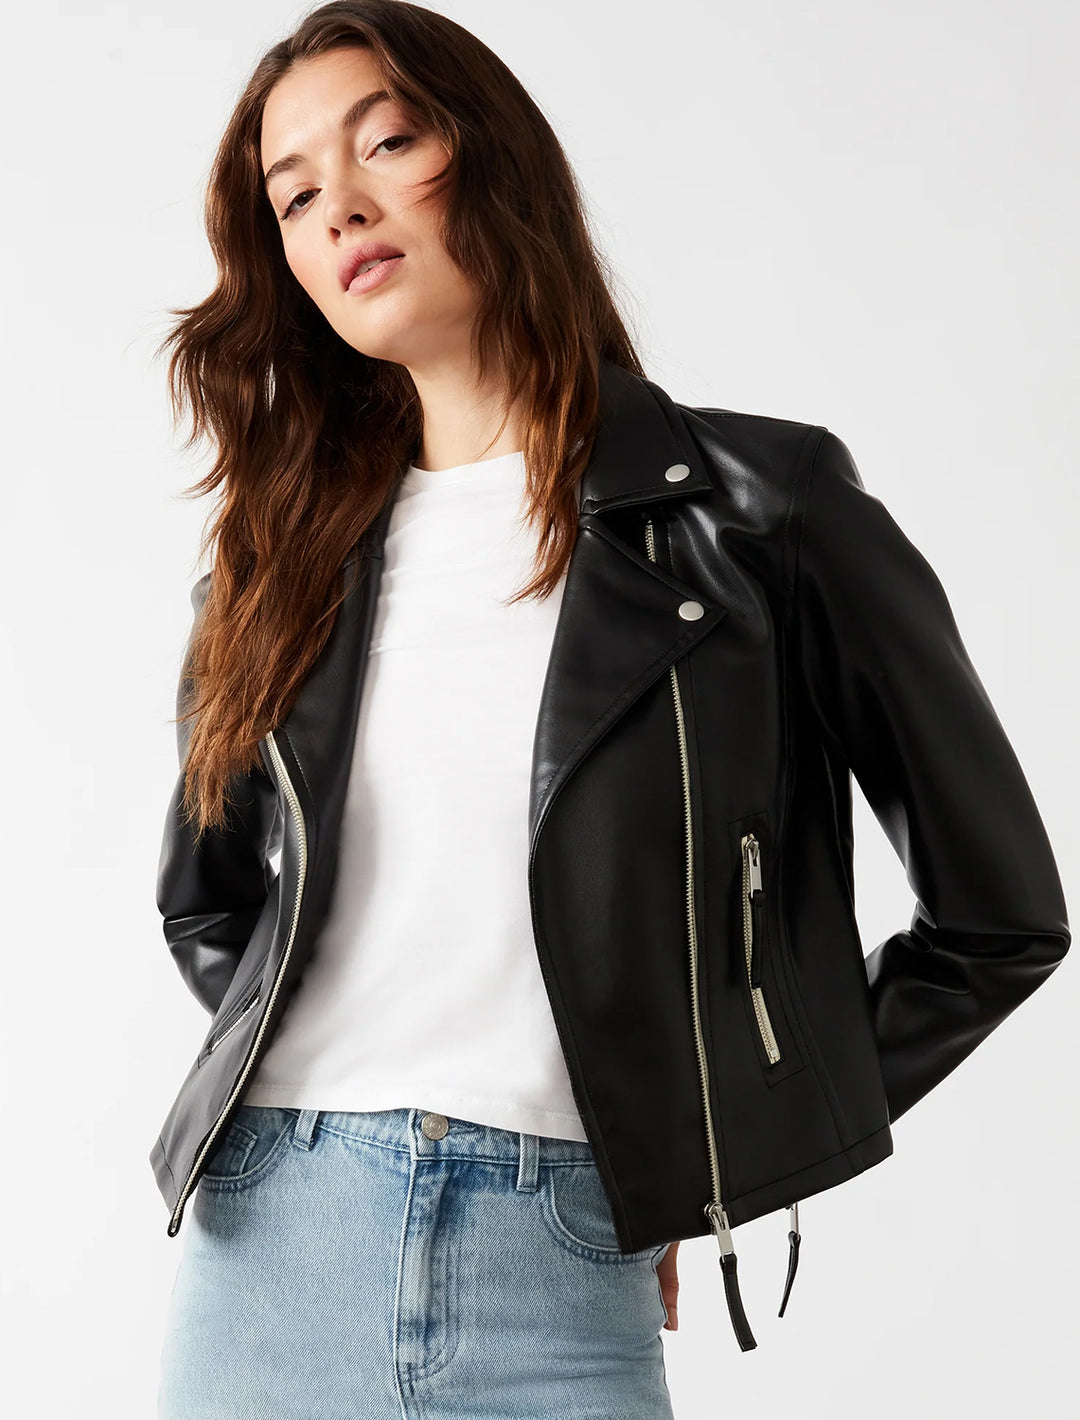 Model wearing Steve Madden's vinka jacket in black with a white tee and blue jeans.